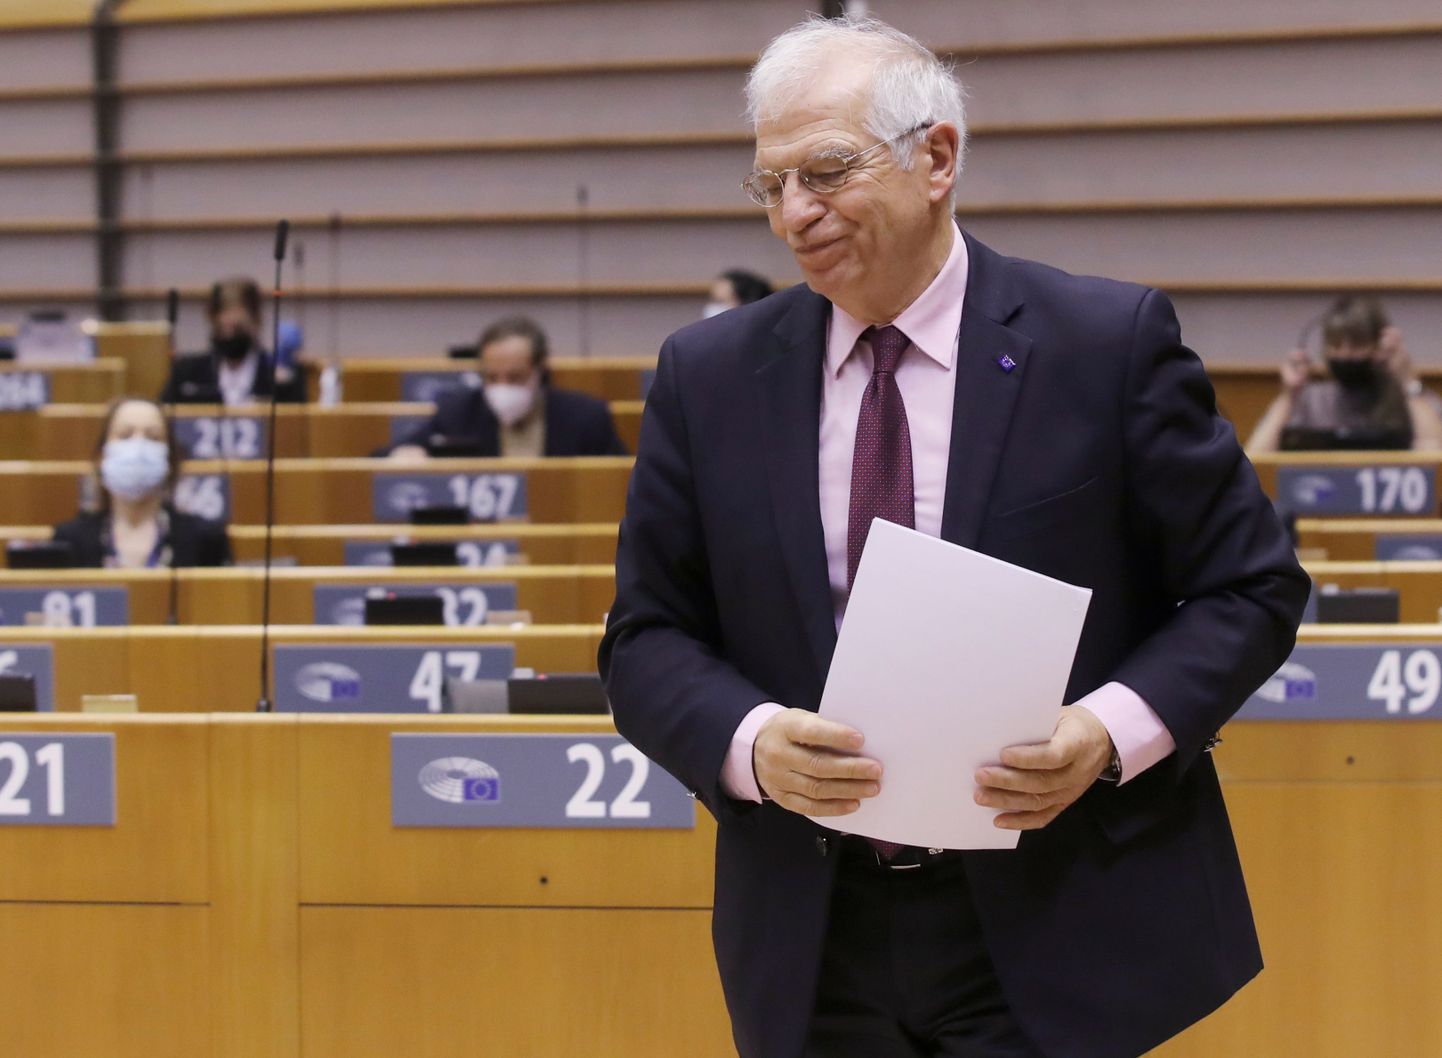 European High Representative of the Union for Foreign Affairs, Josep Borrell  attends a debate following his visit last week to Russia during a plenary session of the European Parliament, in Brussels, on February 9, 2021. (Photo by Olivier HOSLET / POOL / AFP)